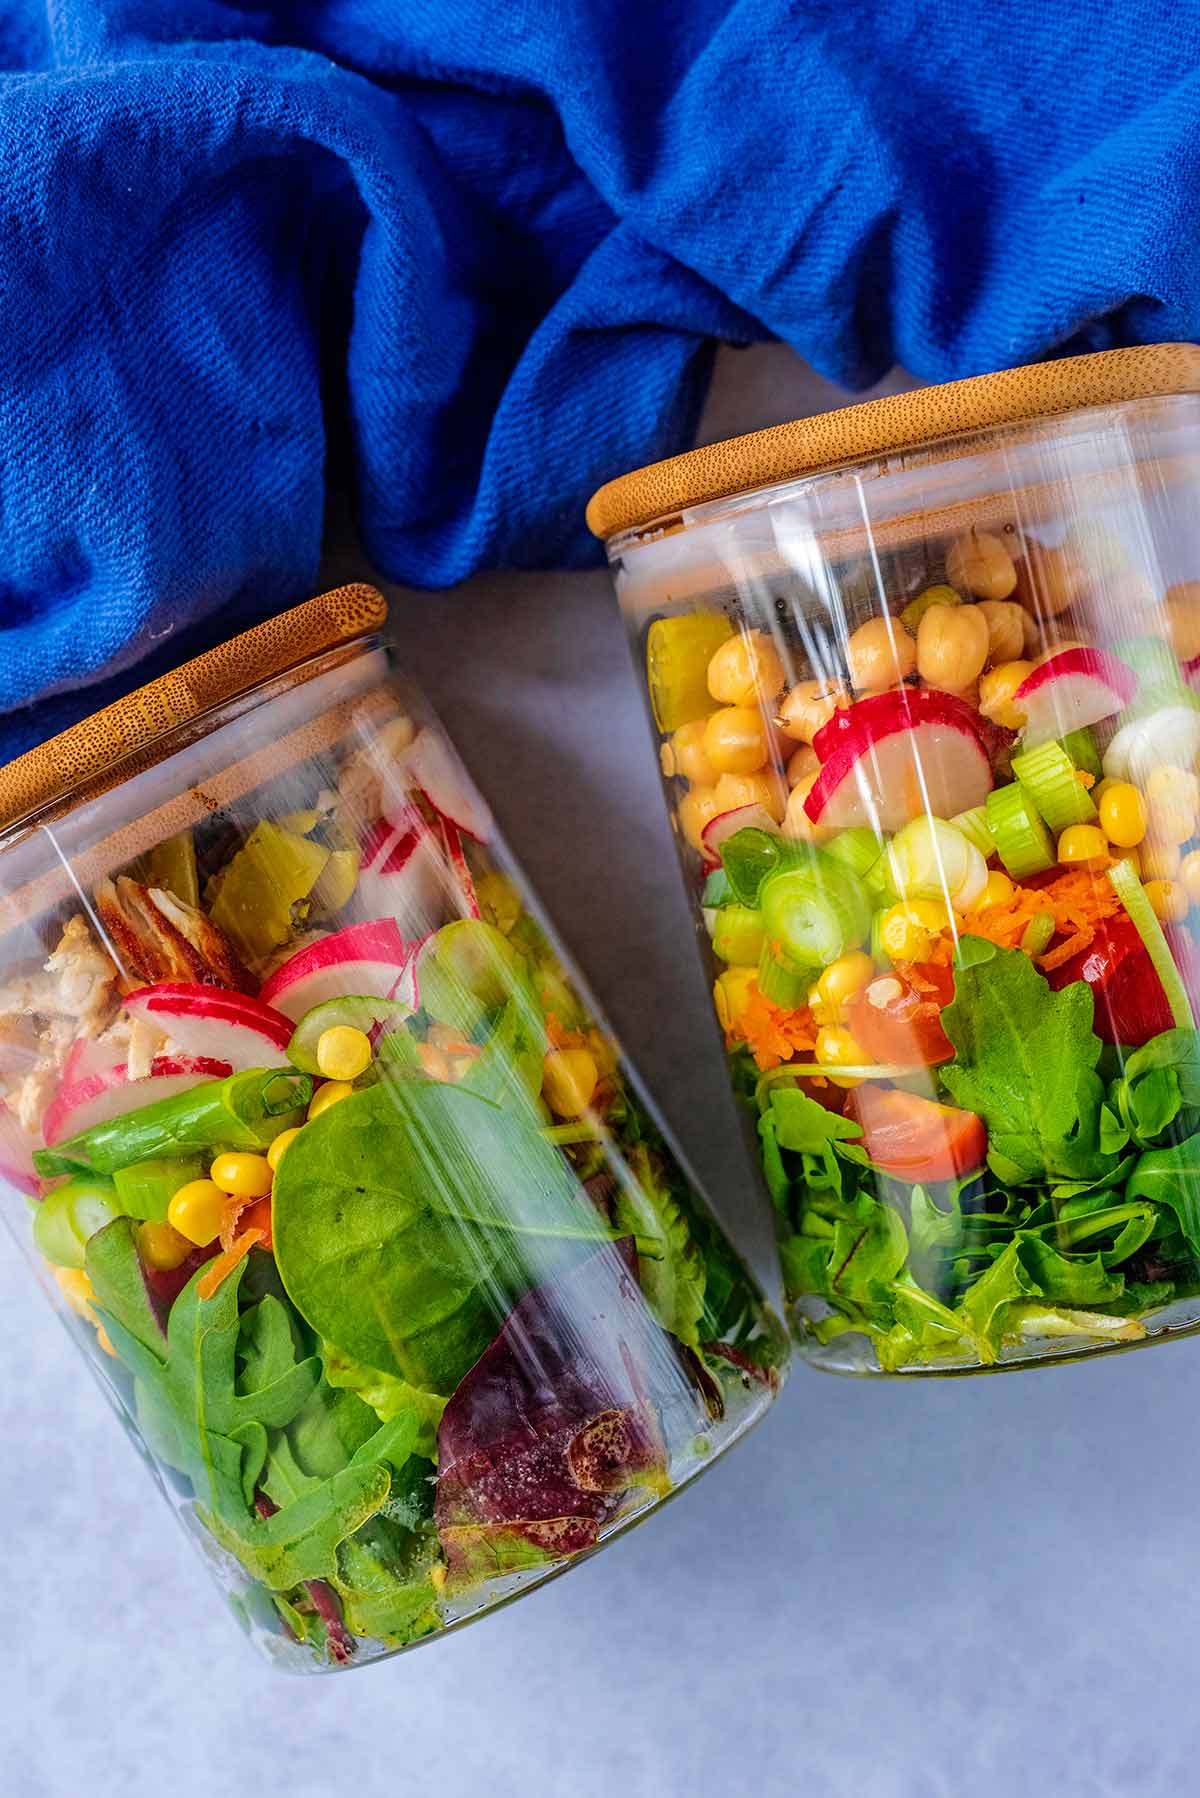 Two jars, full of salad, with lids on.